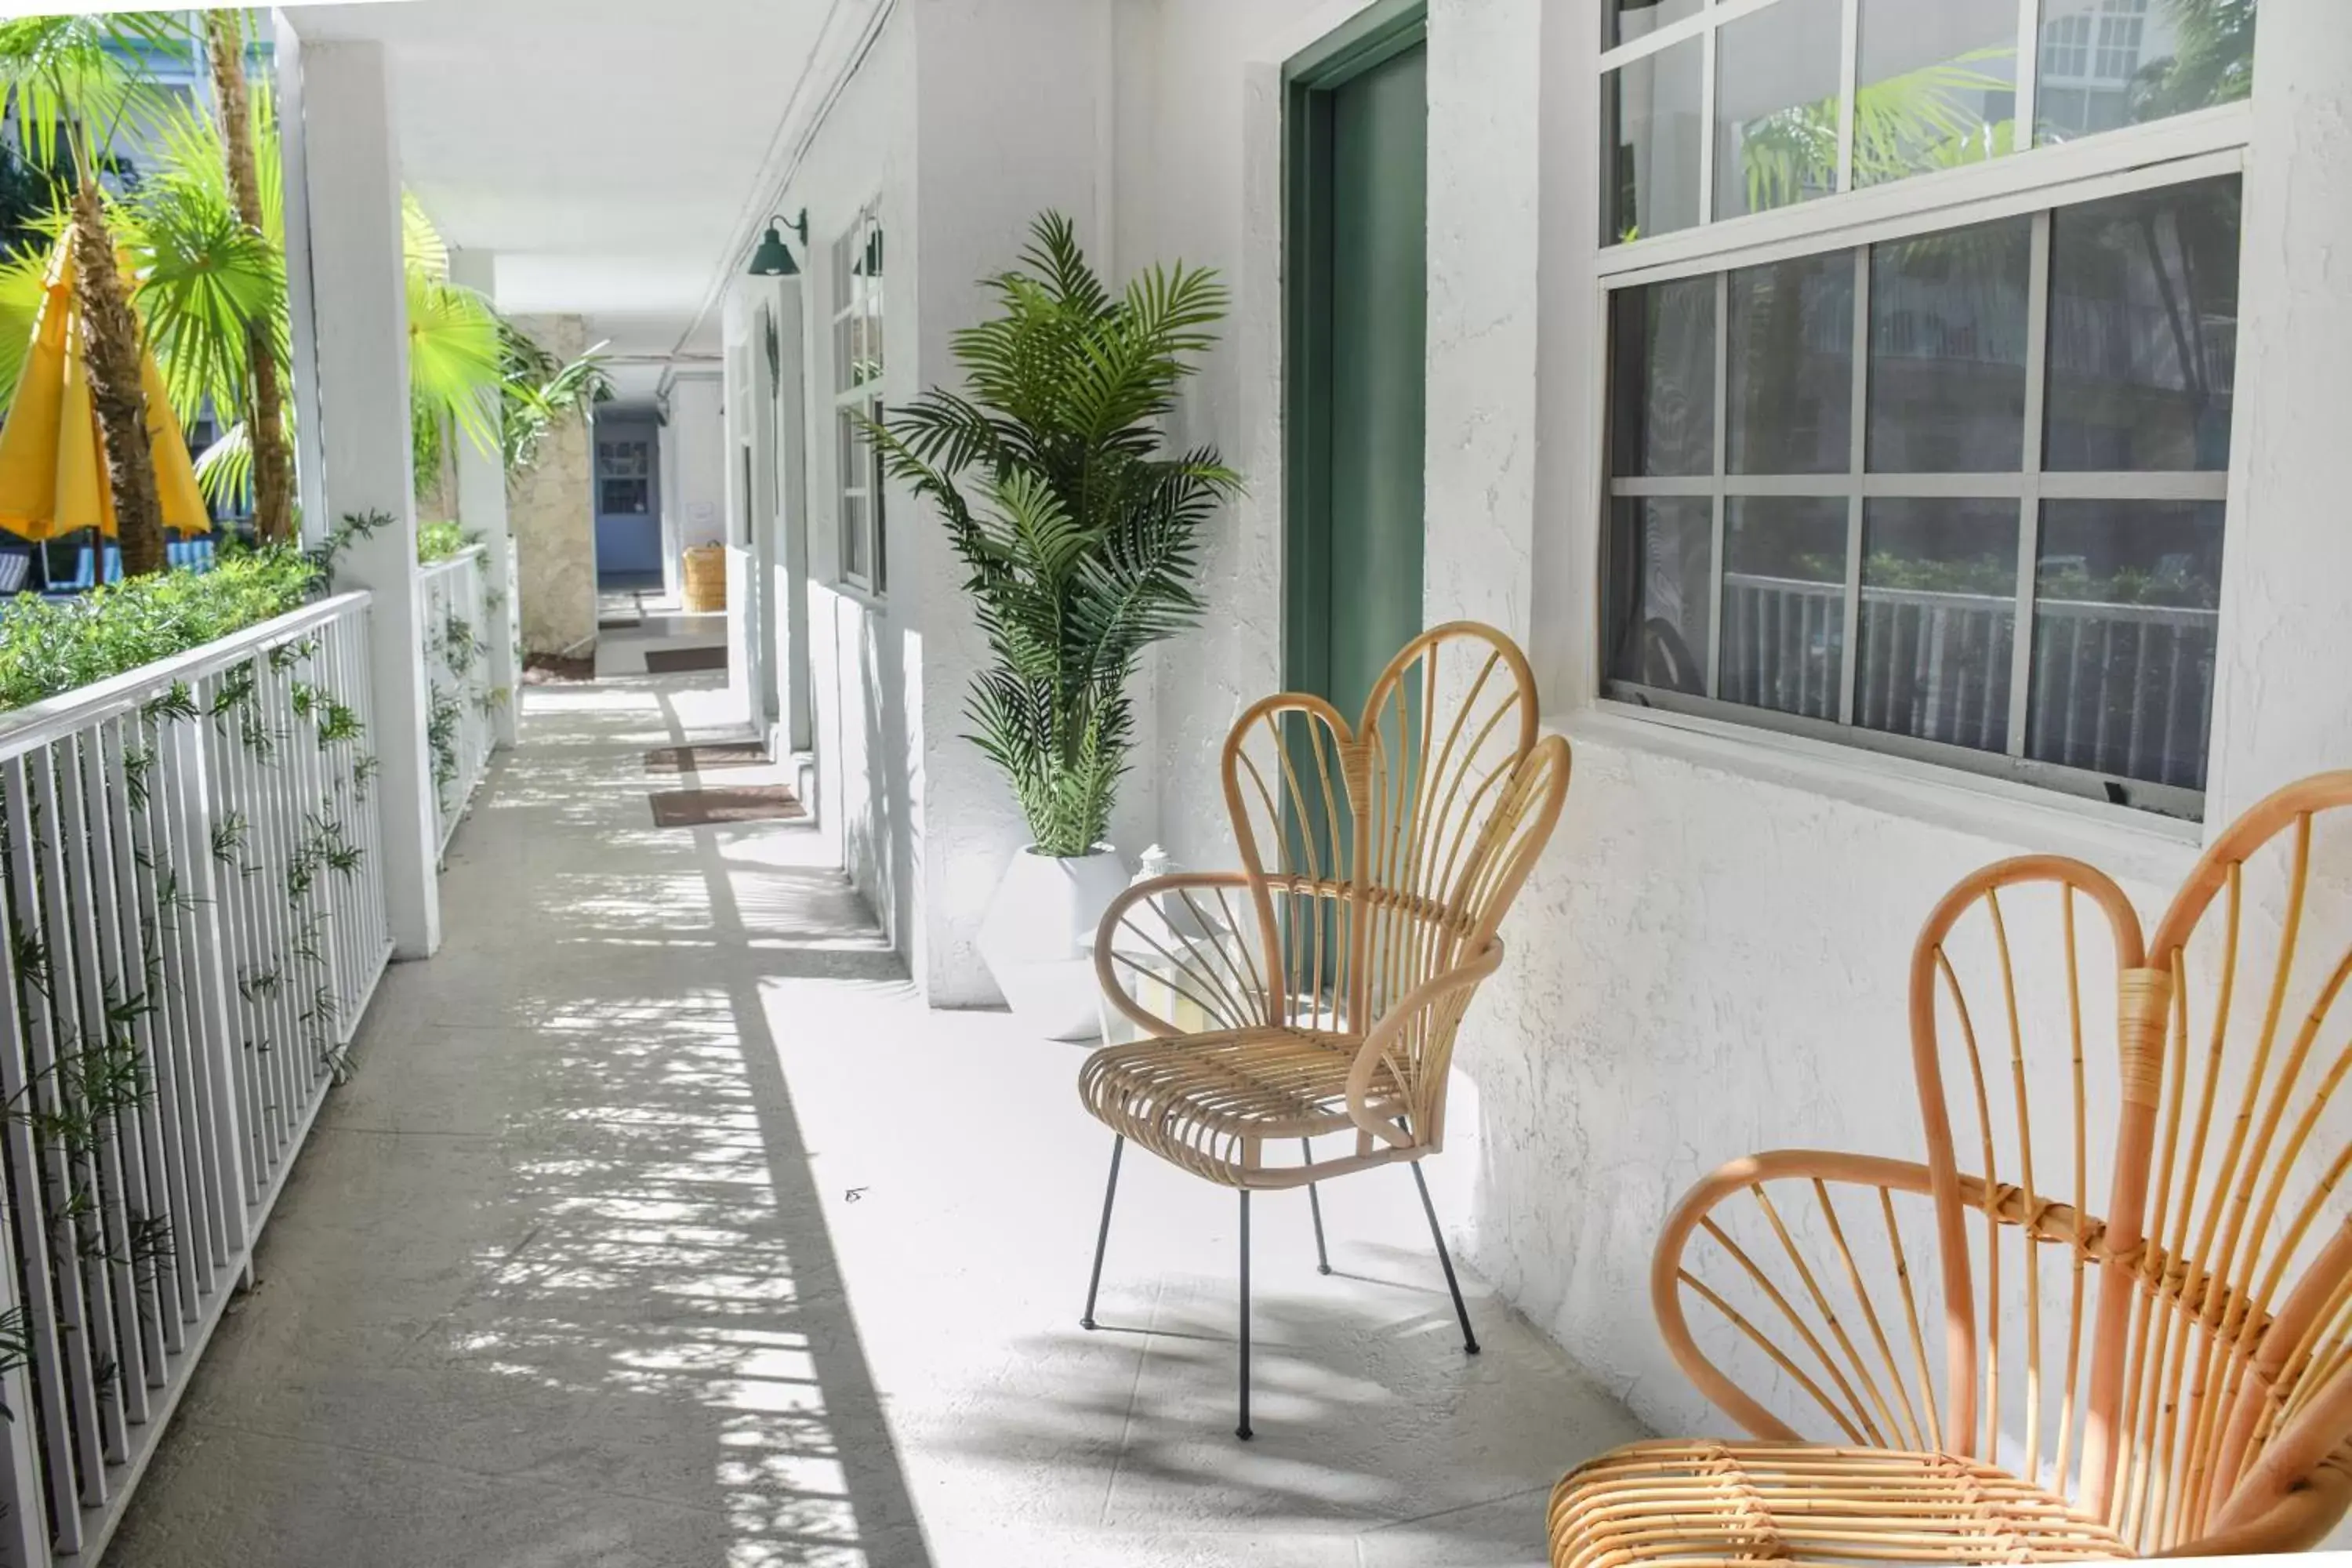 Balcony/Terrace in Coral Reef at Key Biscayne